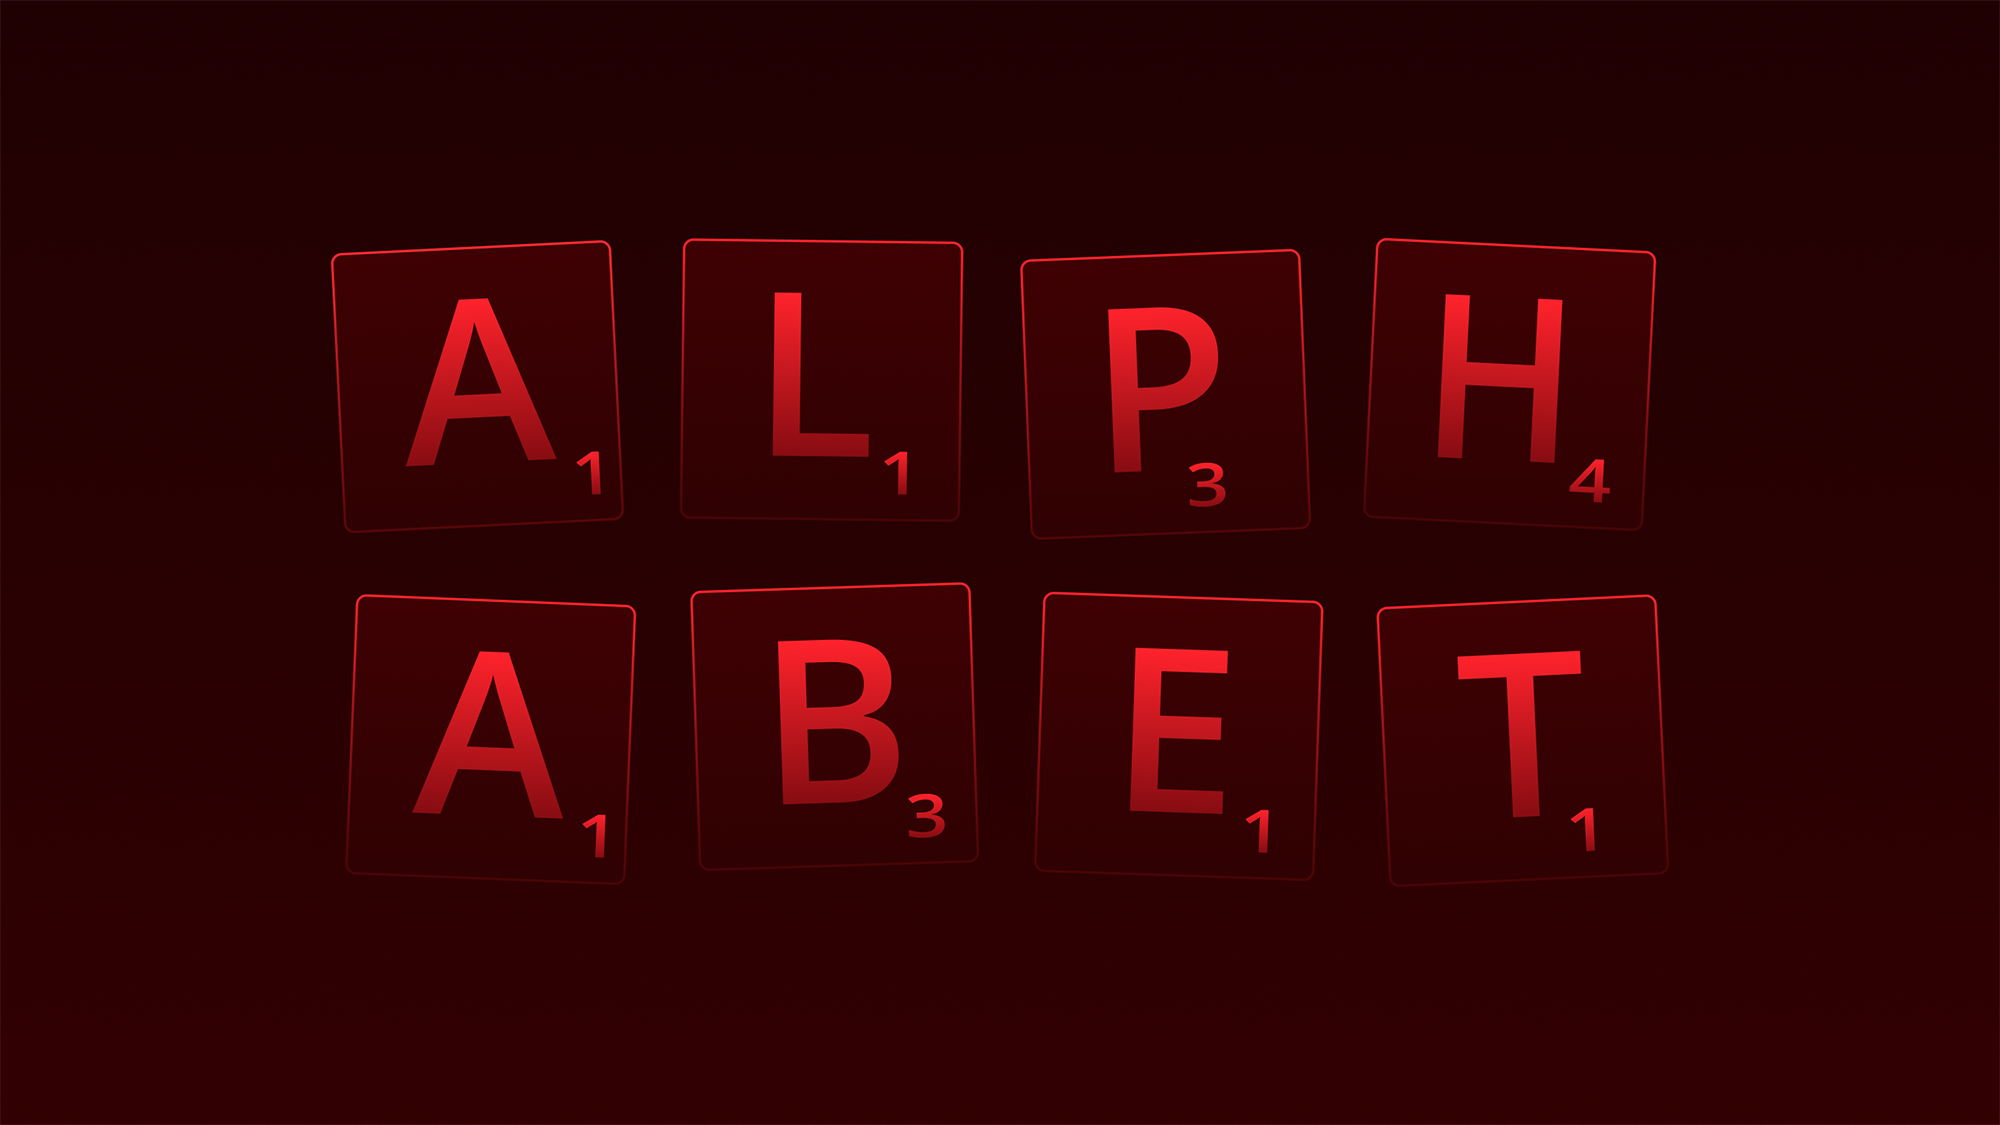 Alphabet's unstoppable rise to becoming a global tech leader